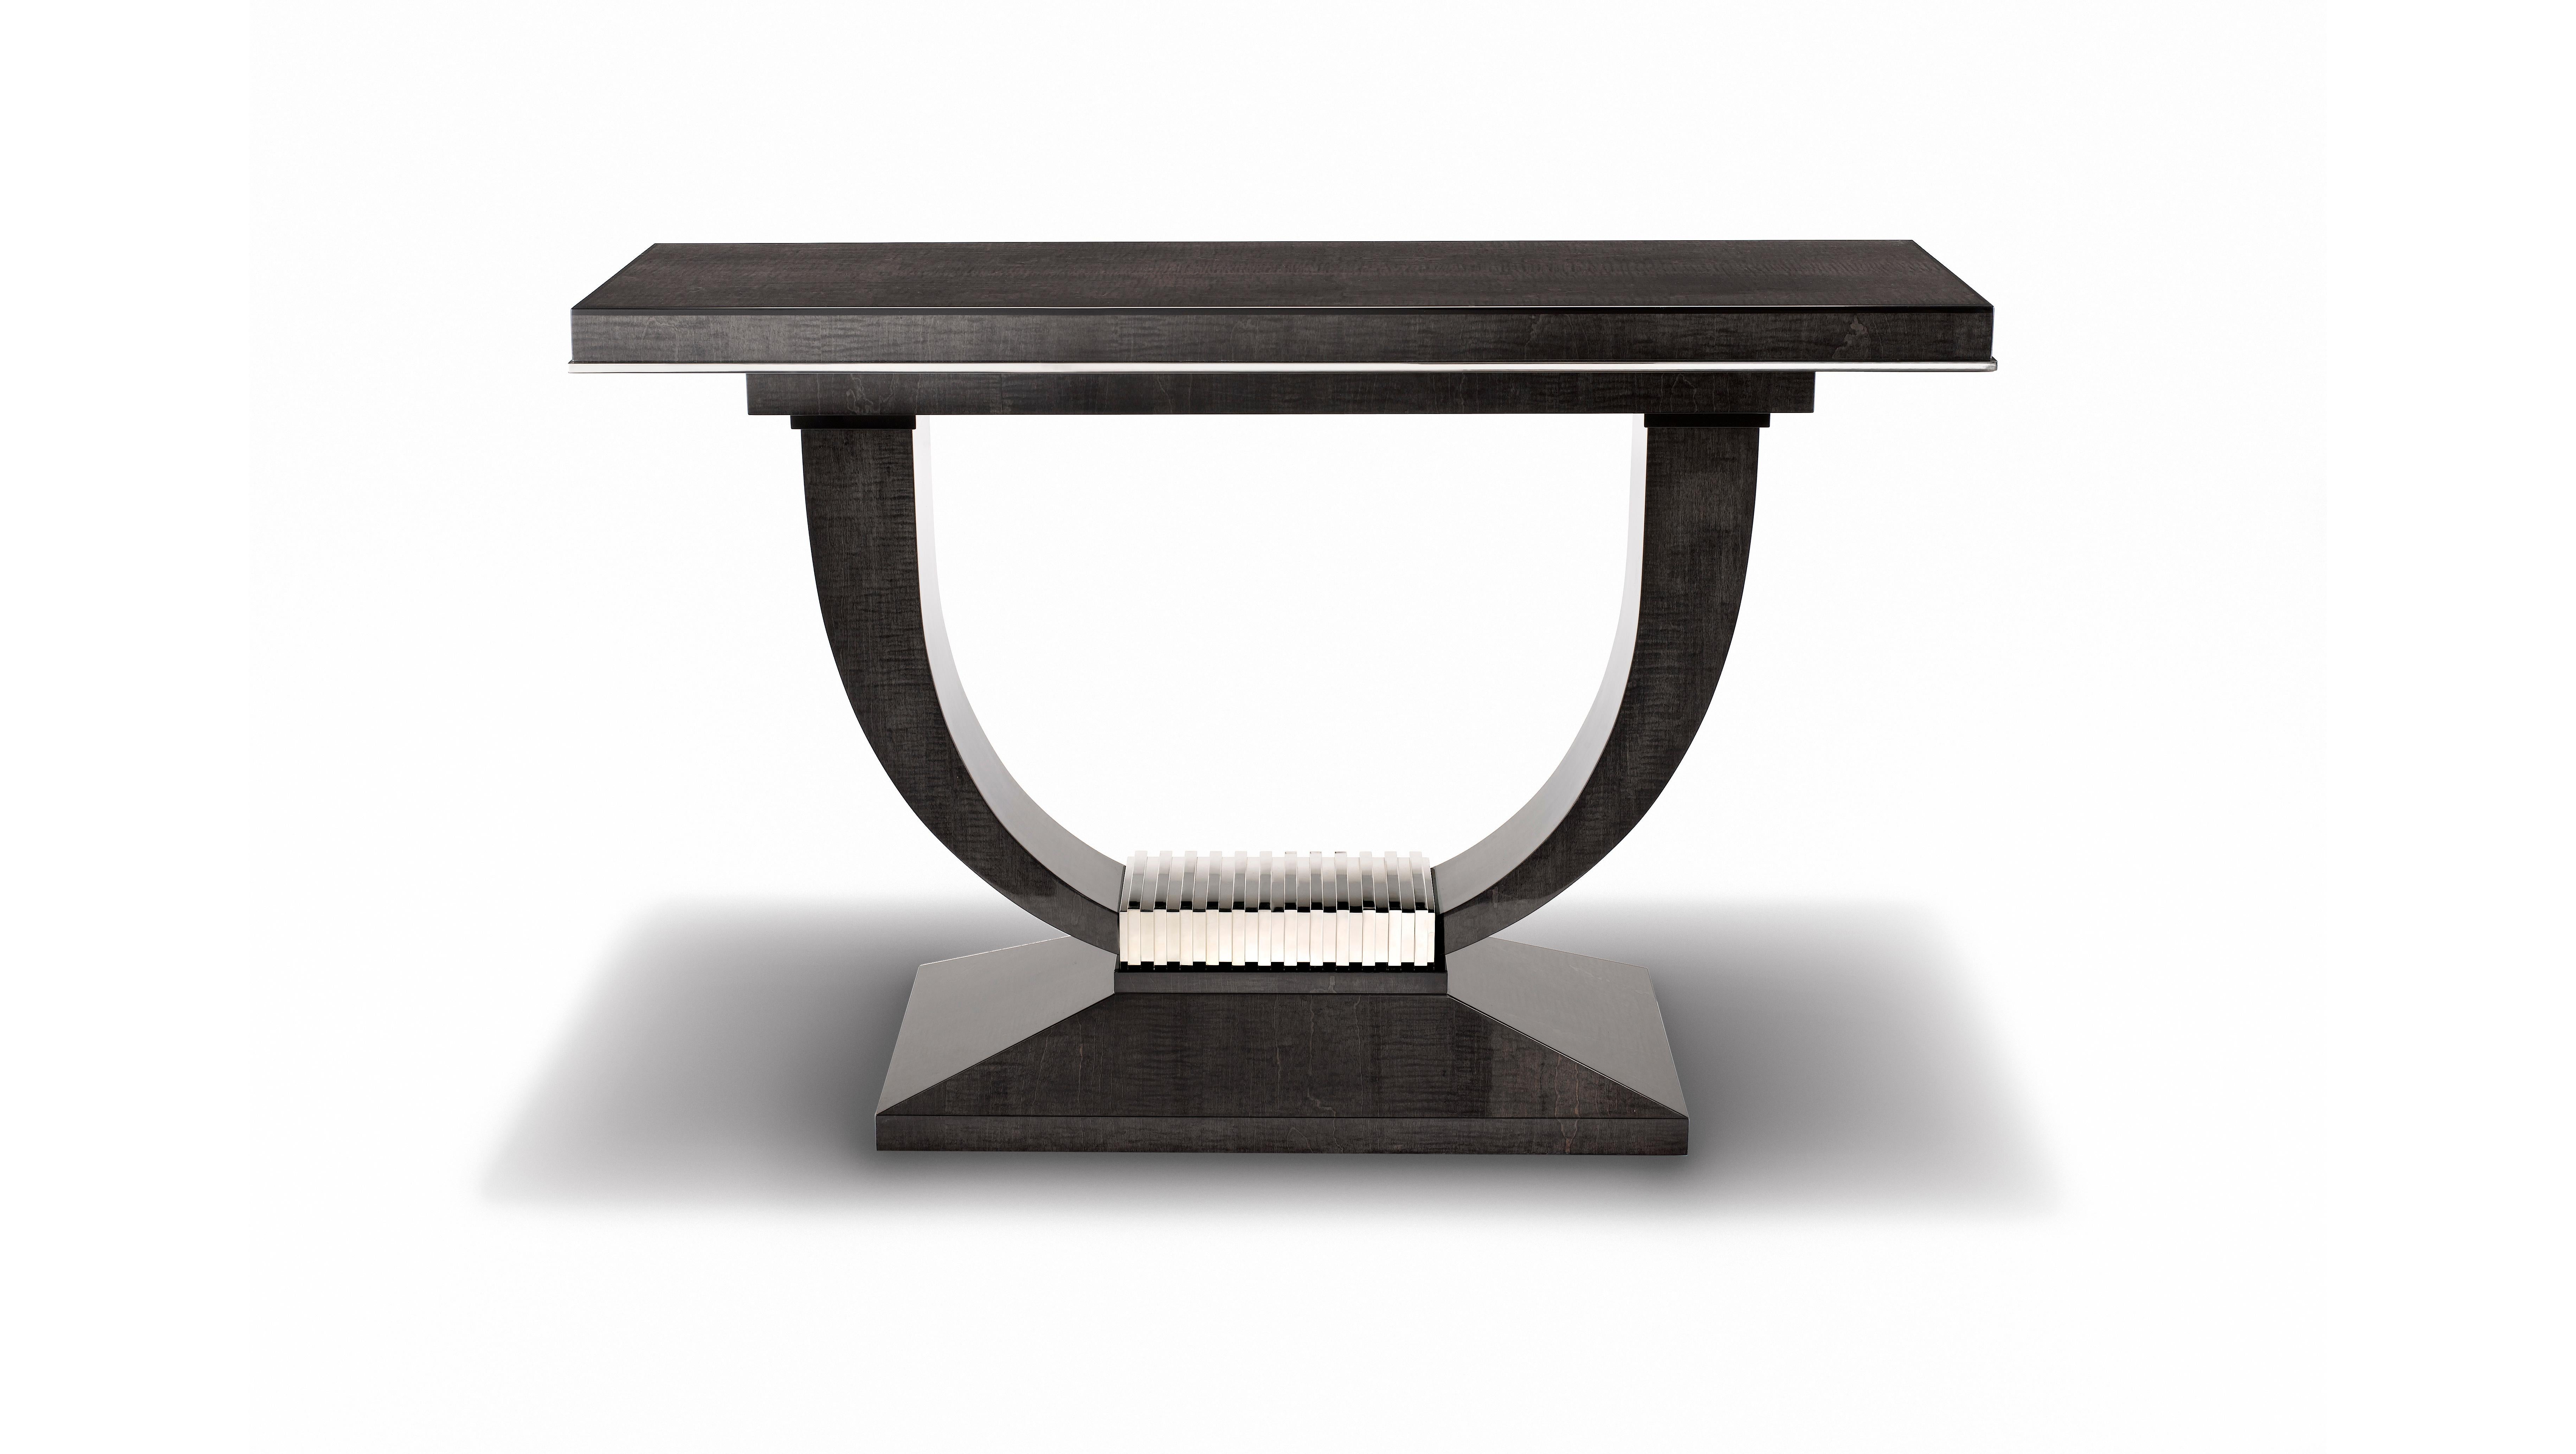 Davidson's Art Deco Albany Console Table, in Sycamore Black with Polished Nickel 1